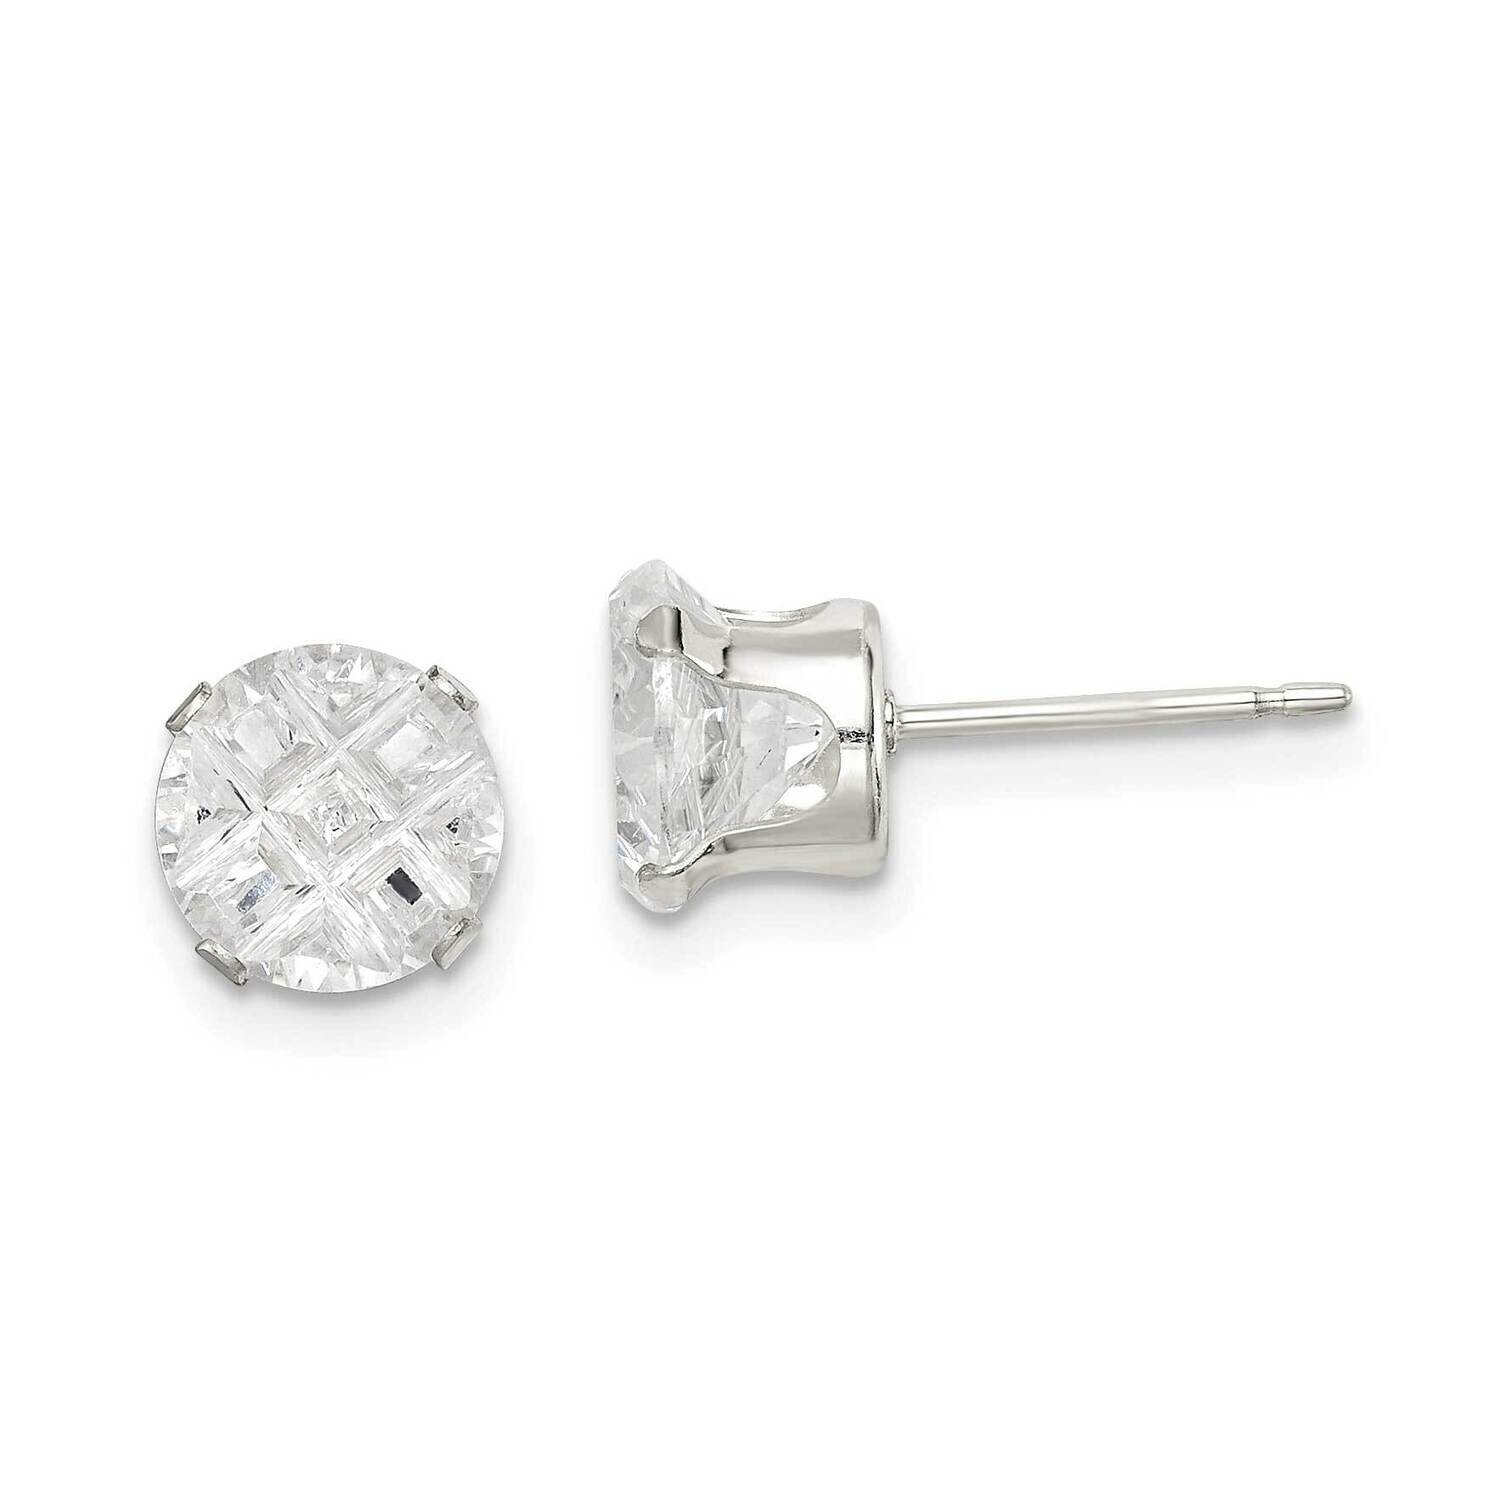 7mm Round 4 Prong Diamond Stud Earrings Sterling Silver QE7489